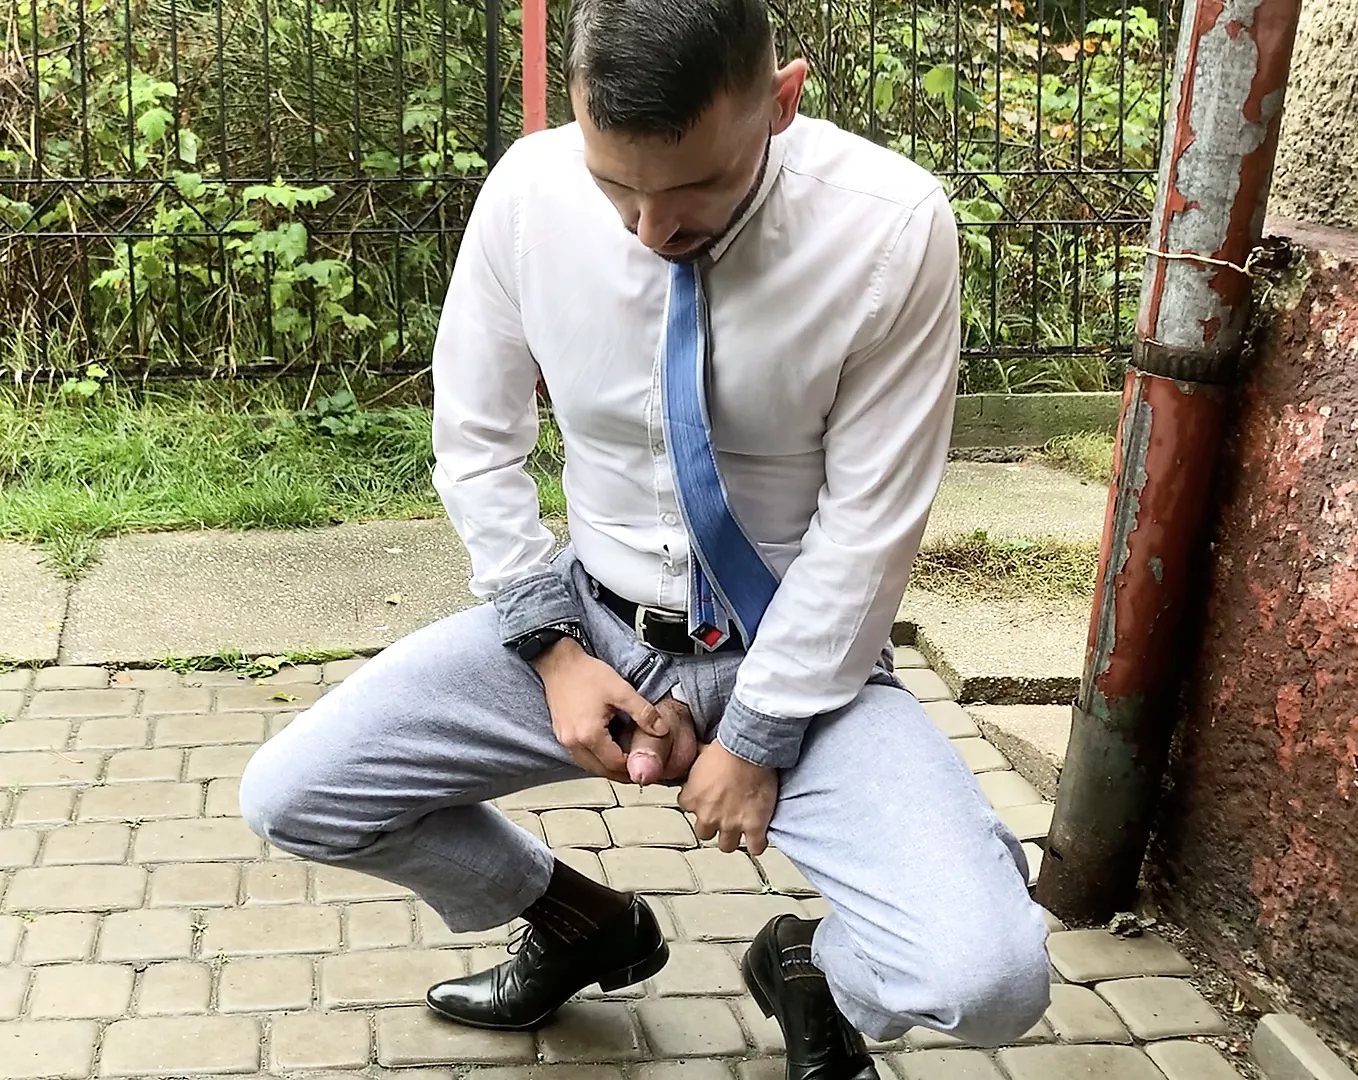 outdoor pissing in suit and image